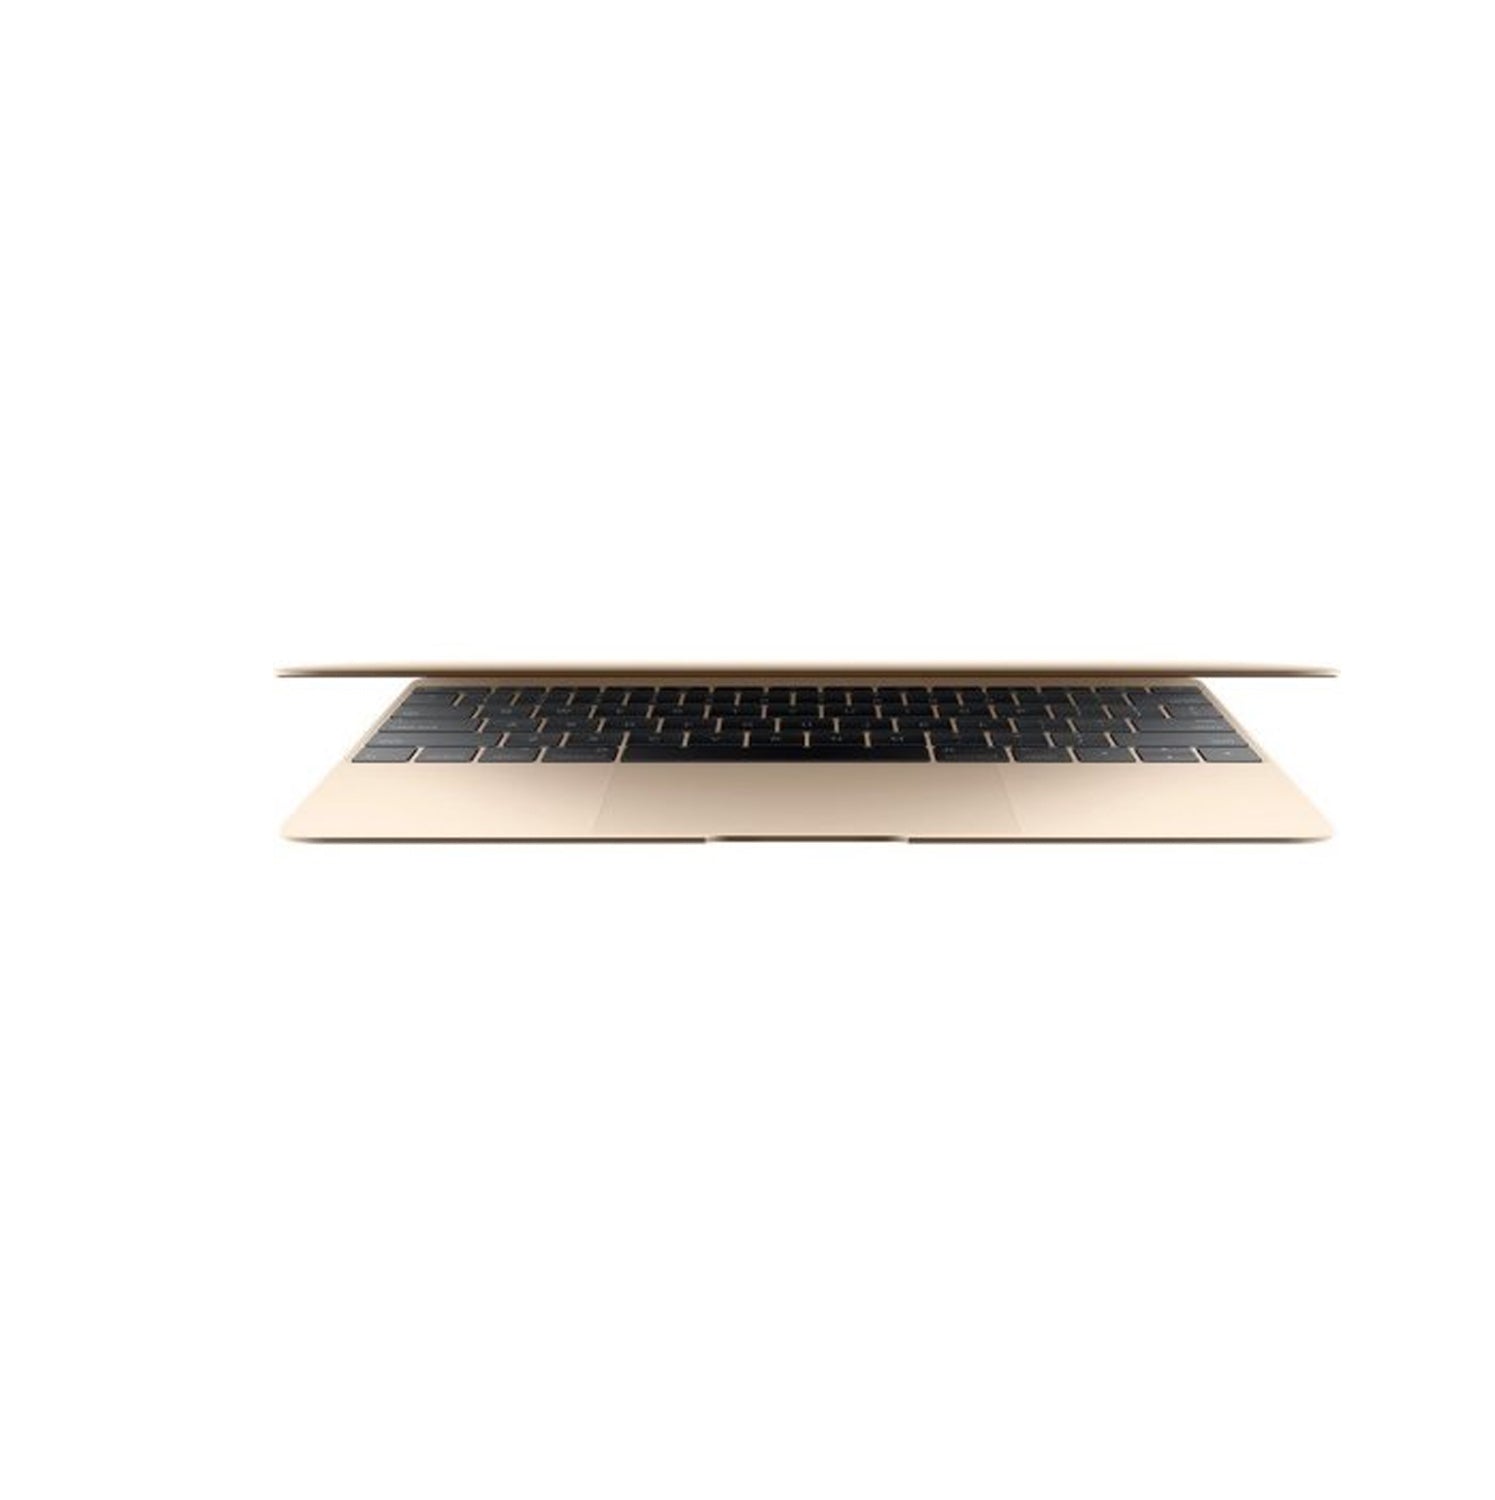 Apple Macbook 12 Inch Laptop, Retina, 512GB Gold (Spanish Keyboard) MNYL2E/A with Cleaning Kit